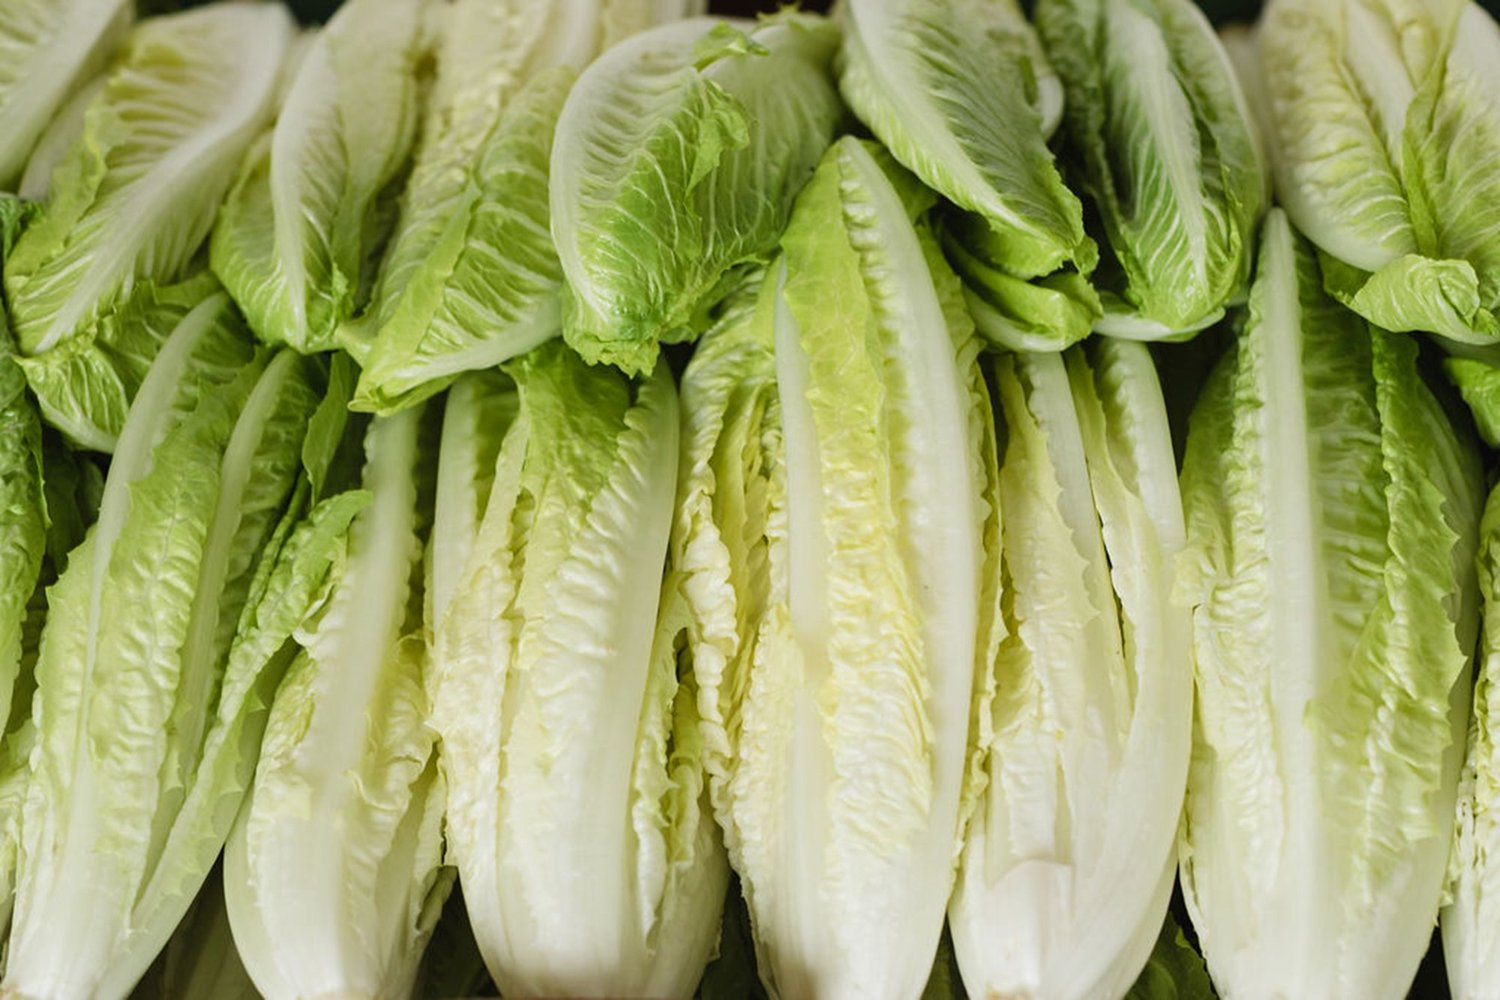 How To Keep Romaine Lettuce Fresh: Easier To Eat Salad Daily